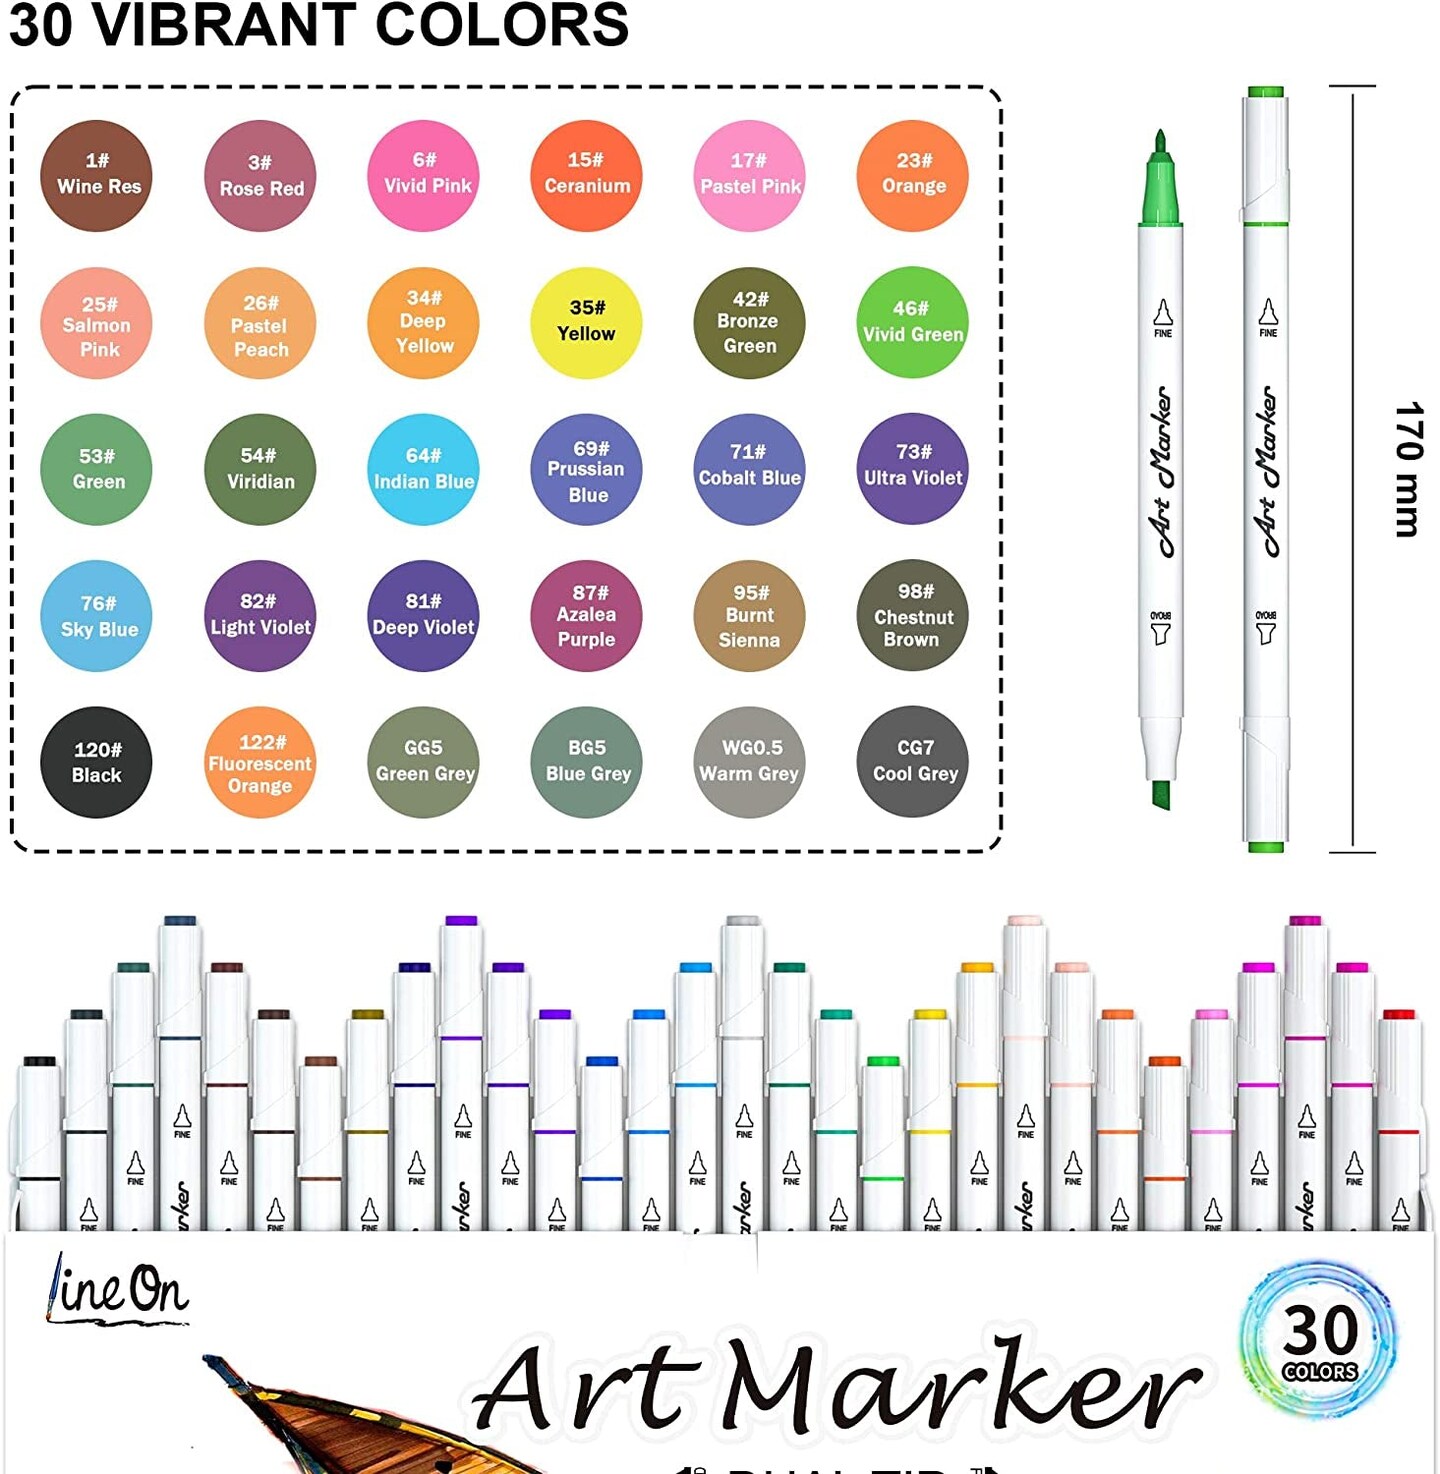 ArtSkills Artists Alcohol Markers Set, Blendable Dual Tip Markers Permanent  Marker Set for Adult Coloring, Drawing, 30-Count